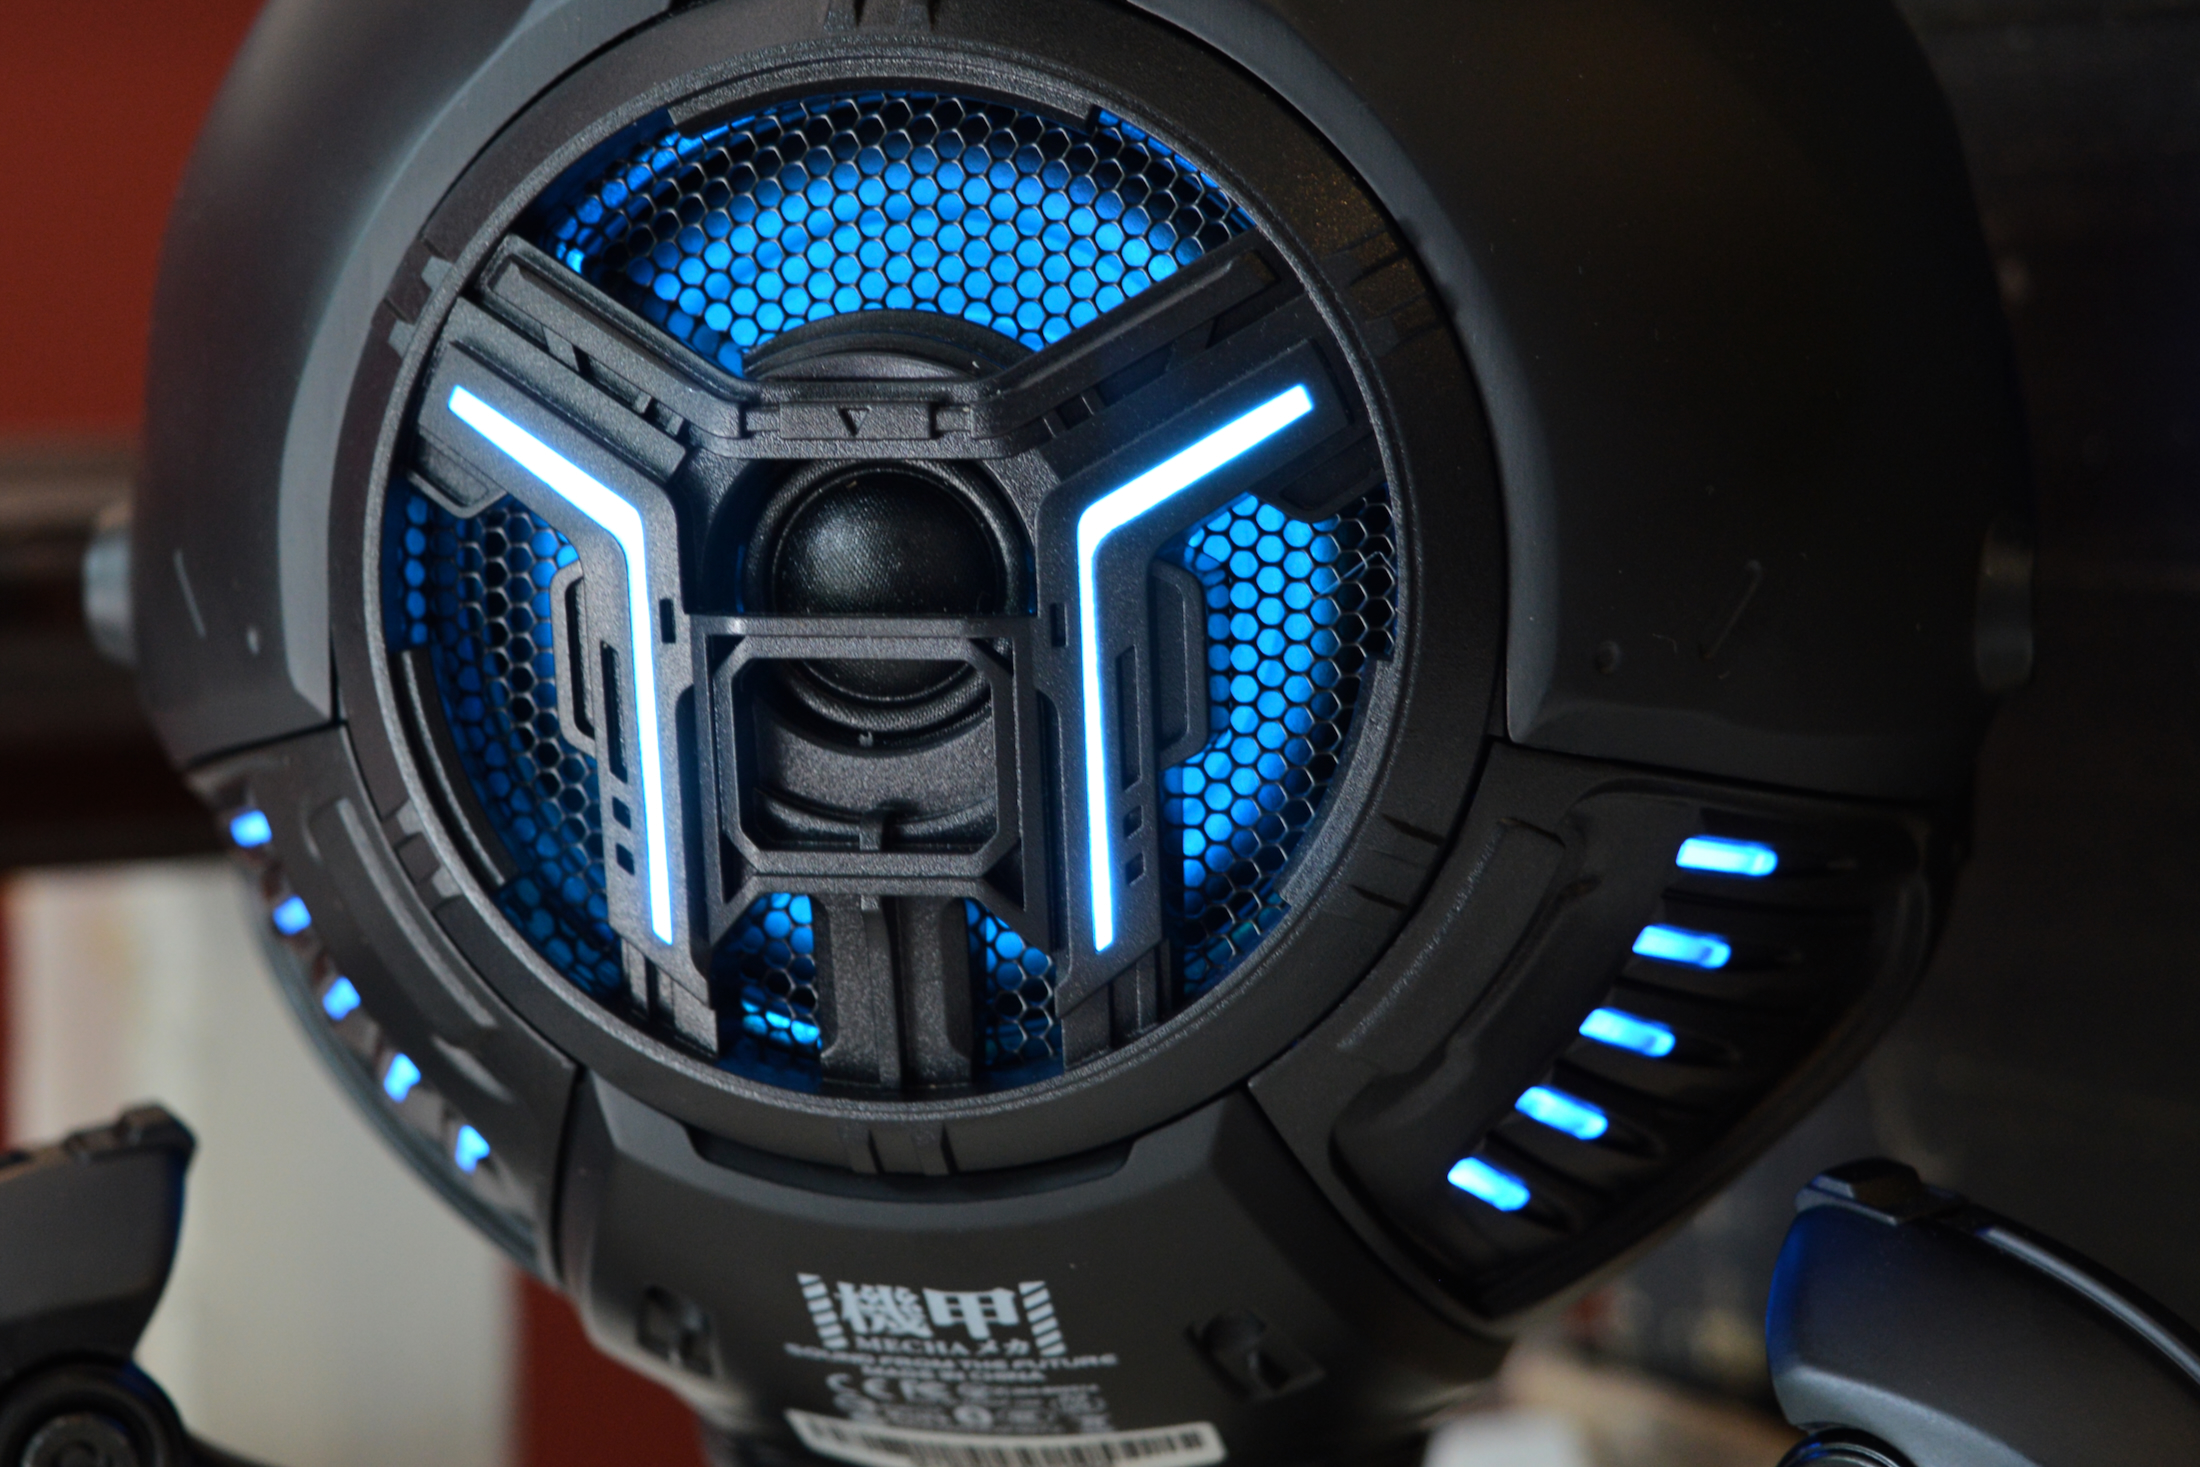 Gravastar Bluetooth Speakers: Inspired by Sci-Fi movies and games